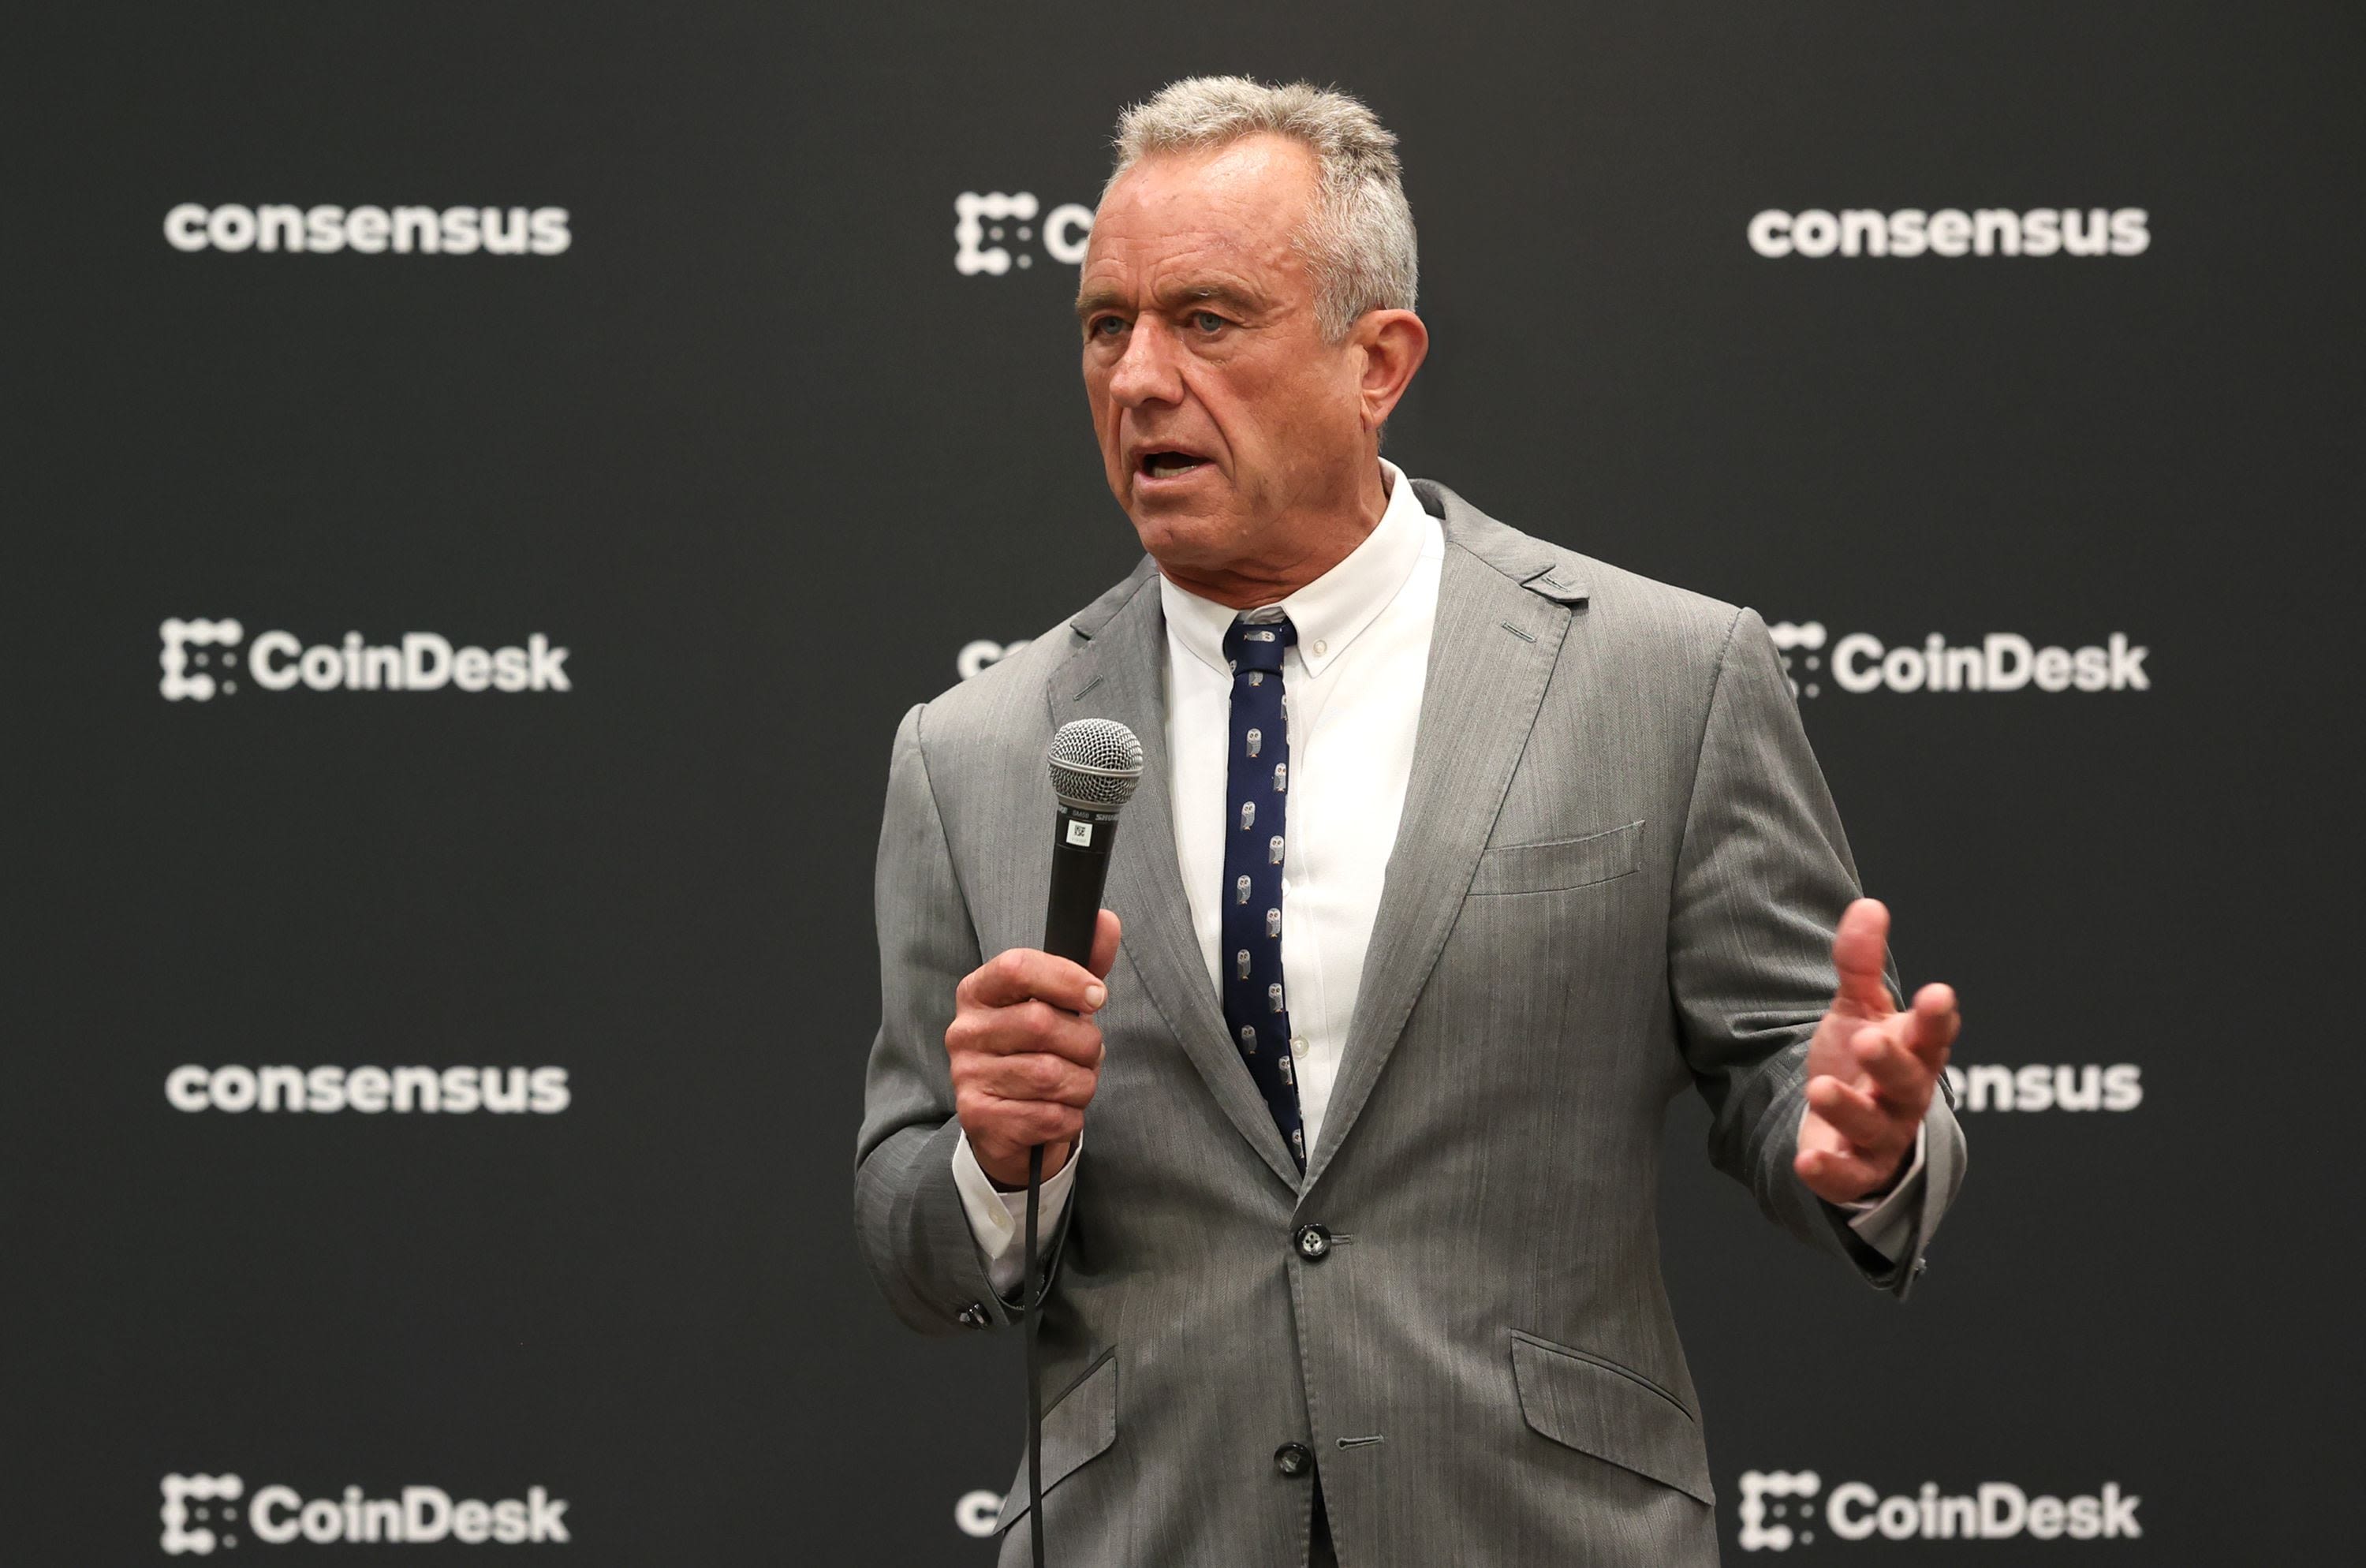 Robert F. Kennedy Jr. on Trump's Guilty Verdict and Pro-Crypto Stance